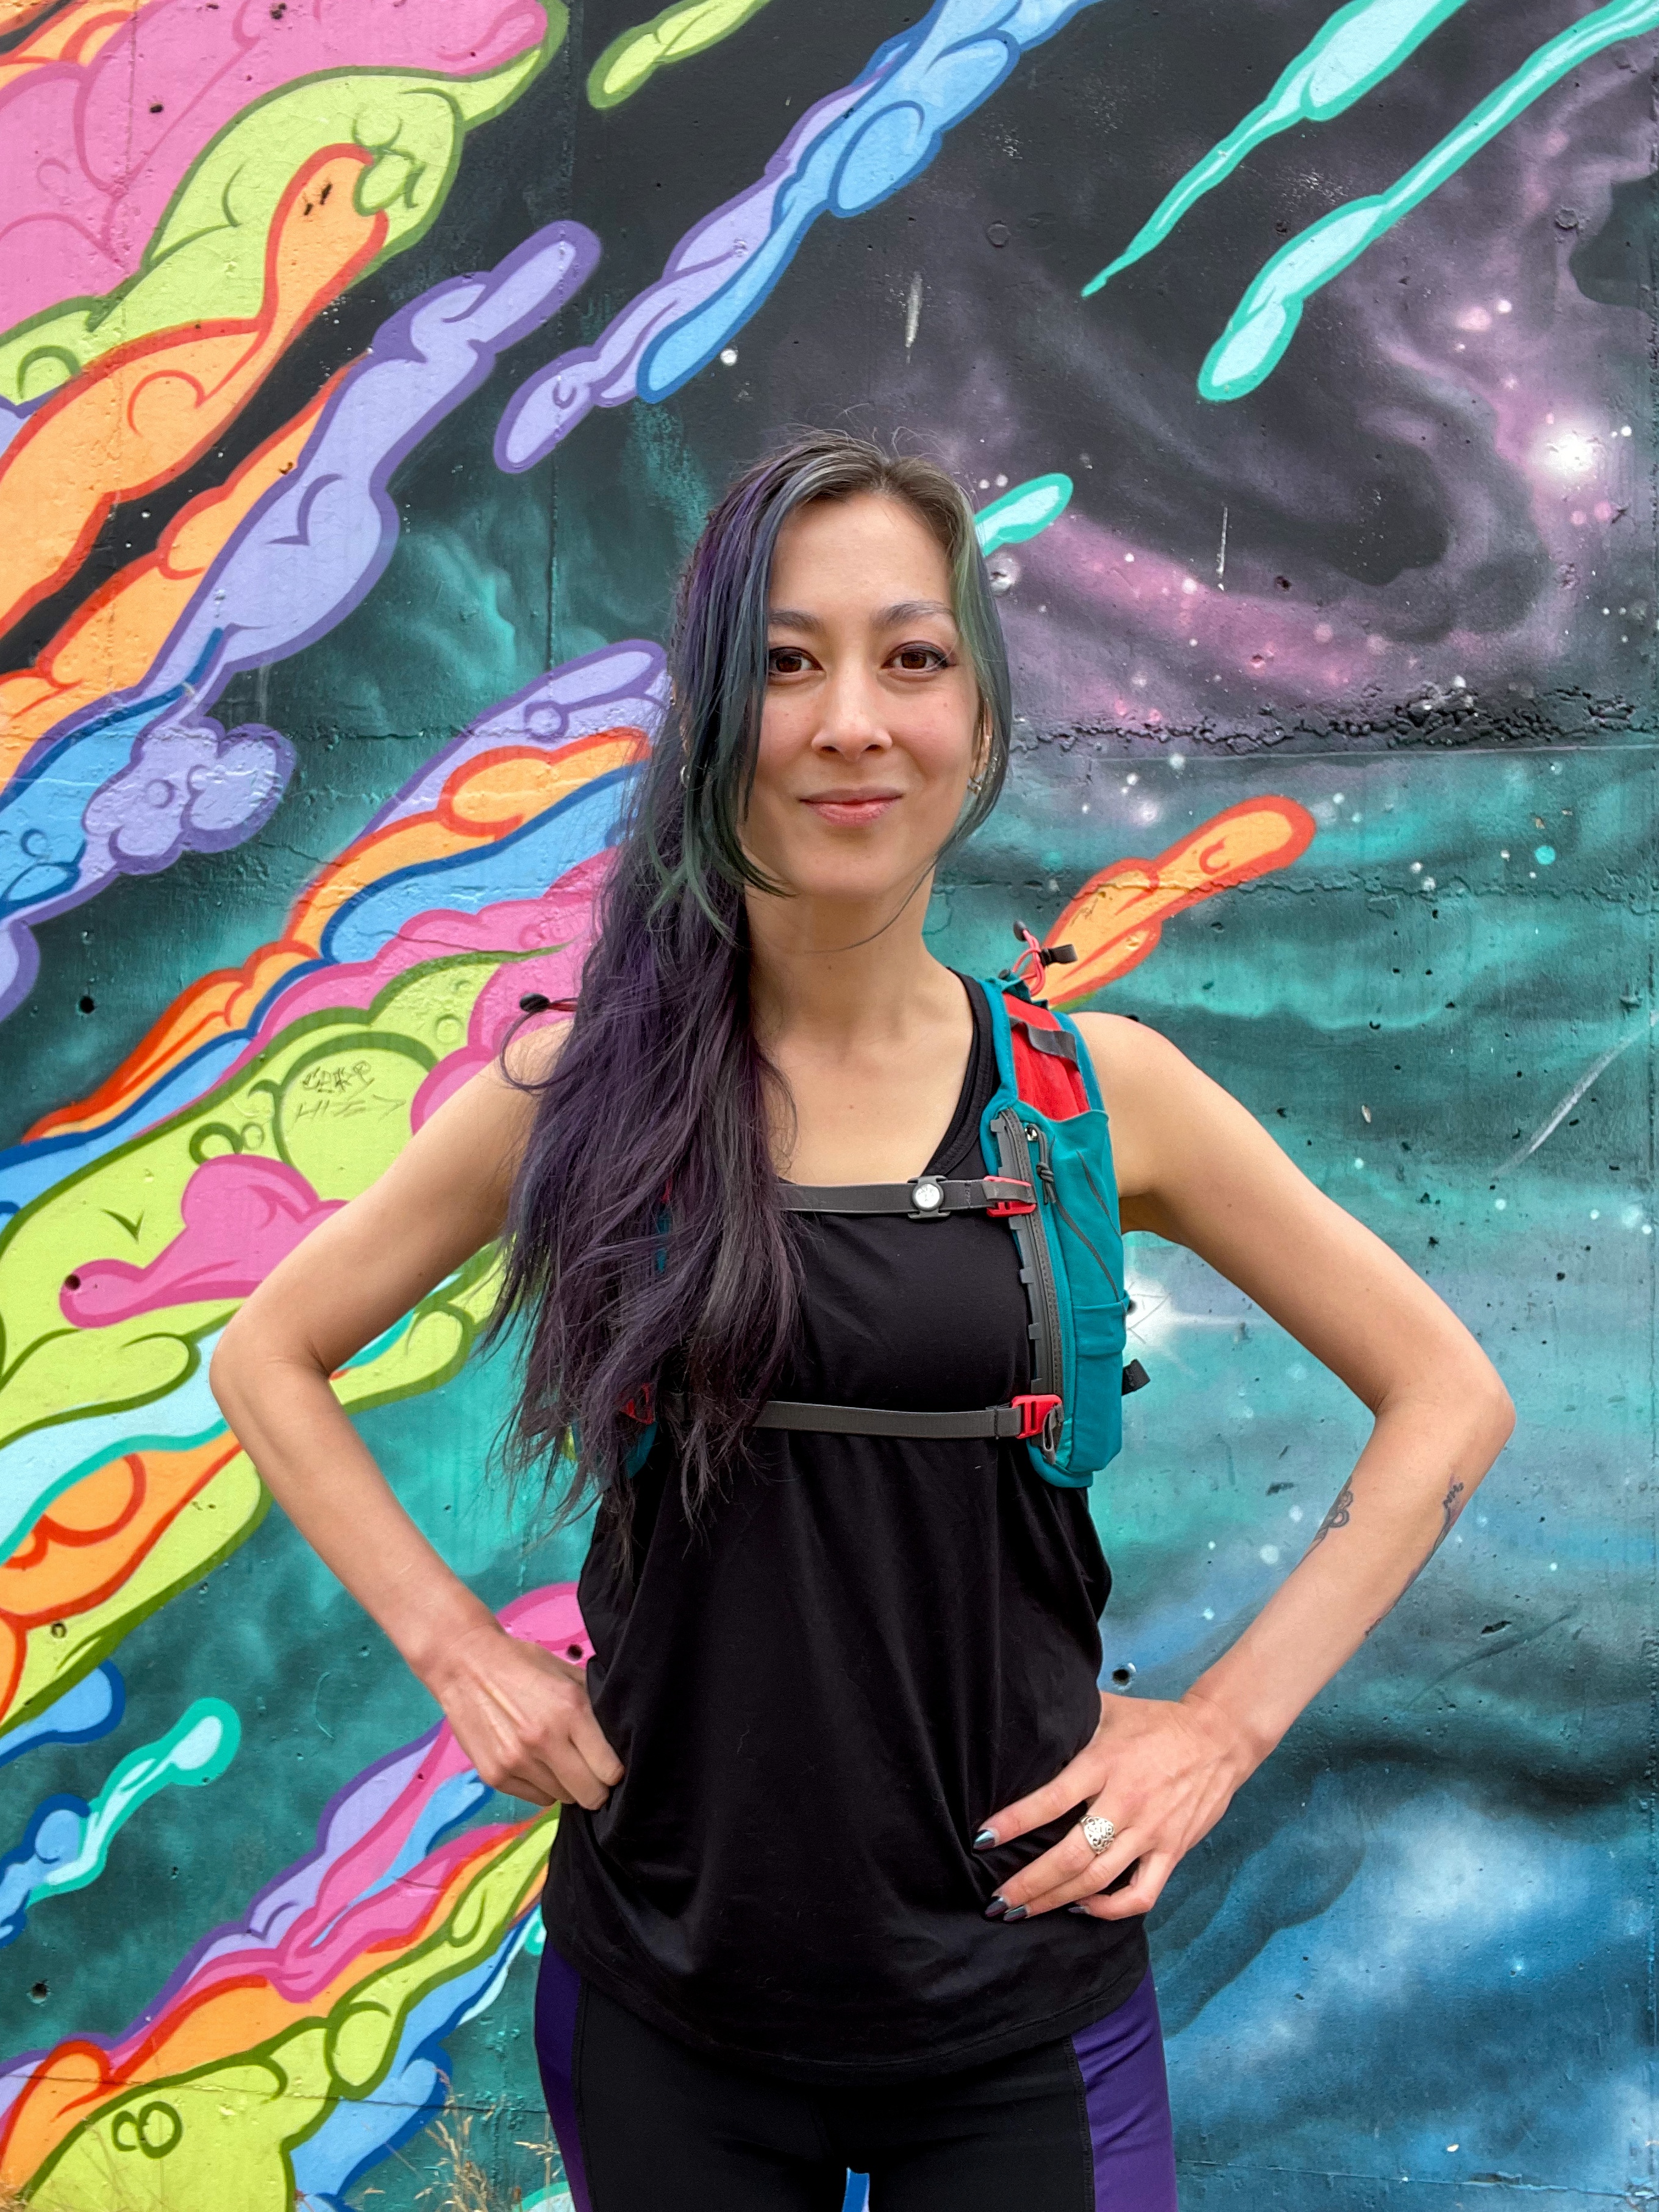 Ronnie stands with hands on her hips in front of an outer space background.